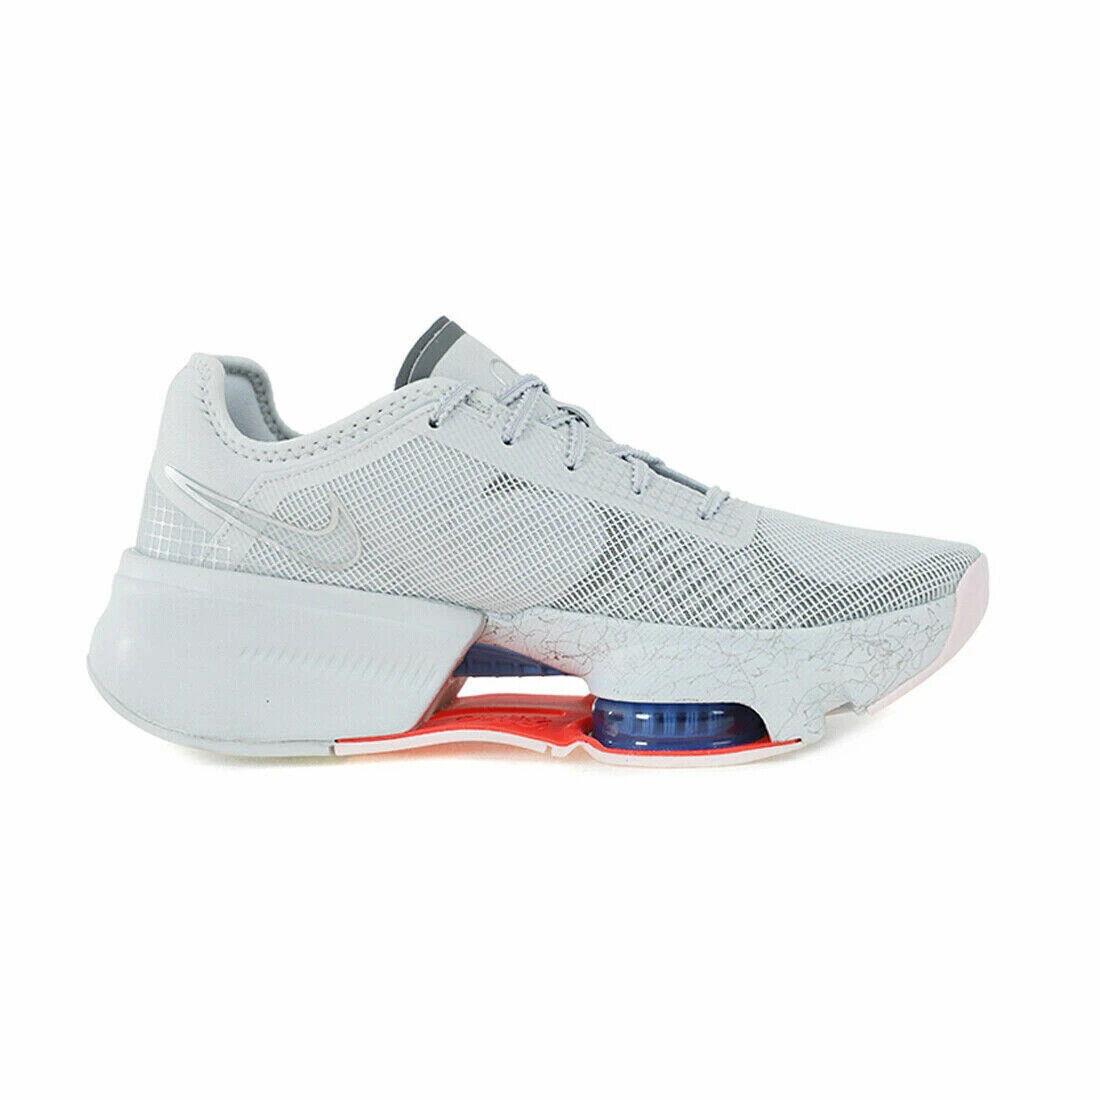 Nike shoes Superrep - Pure Platinum & Silver 1